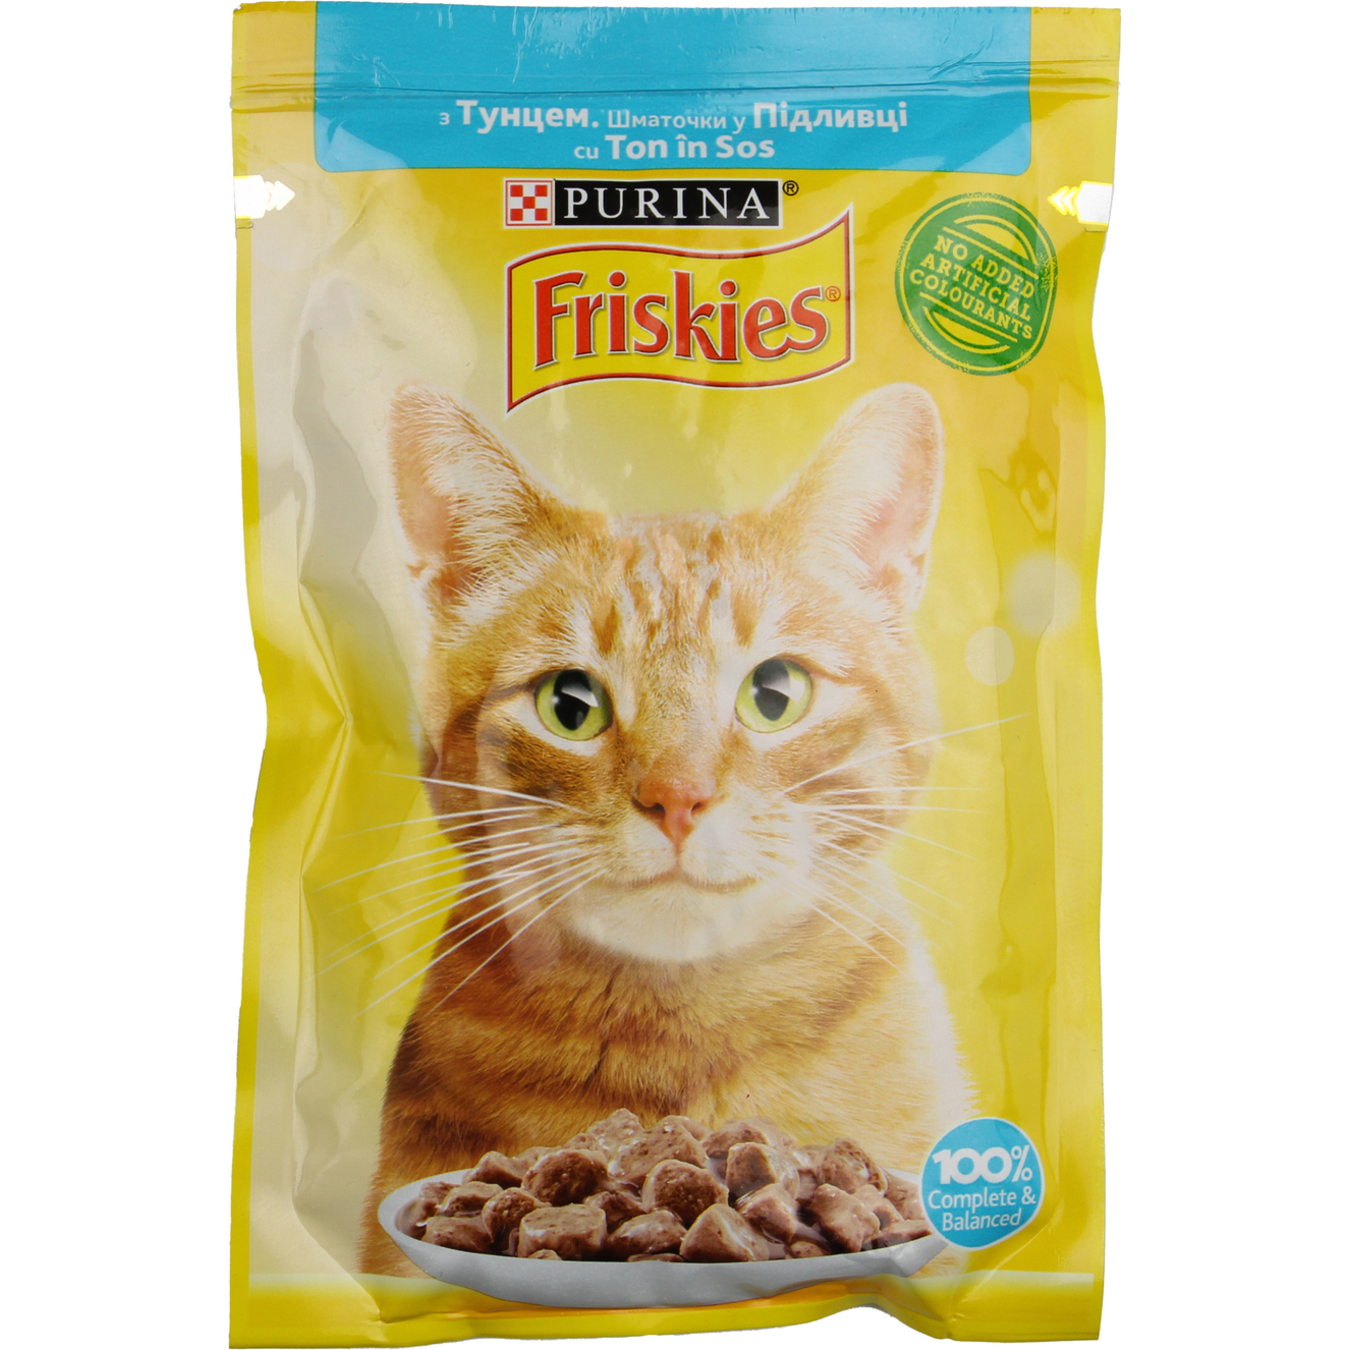 Purina Friskies Cats Food with Tuna Pieces in Sauce 85g